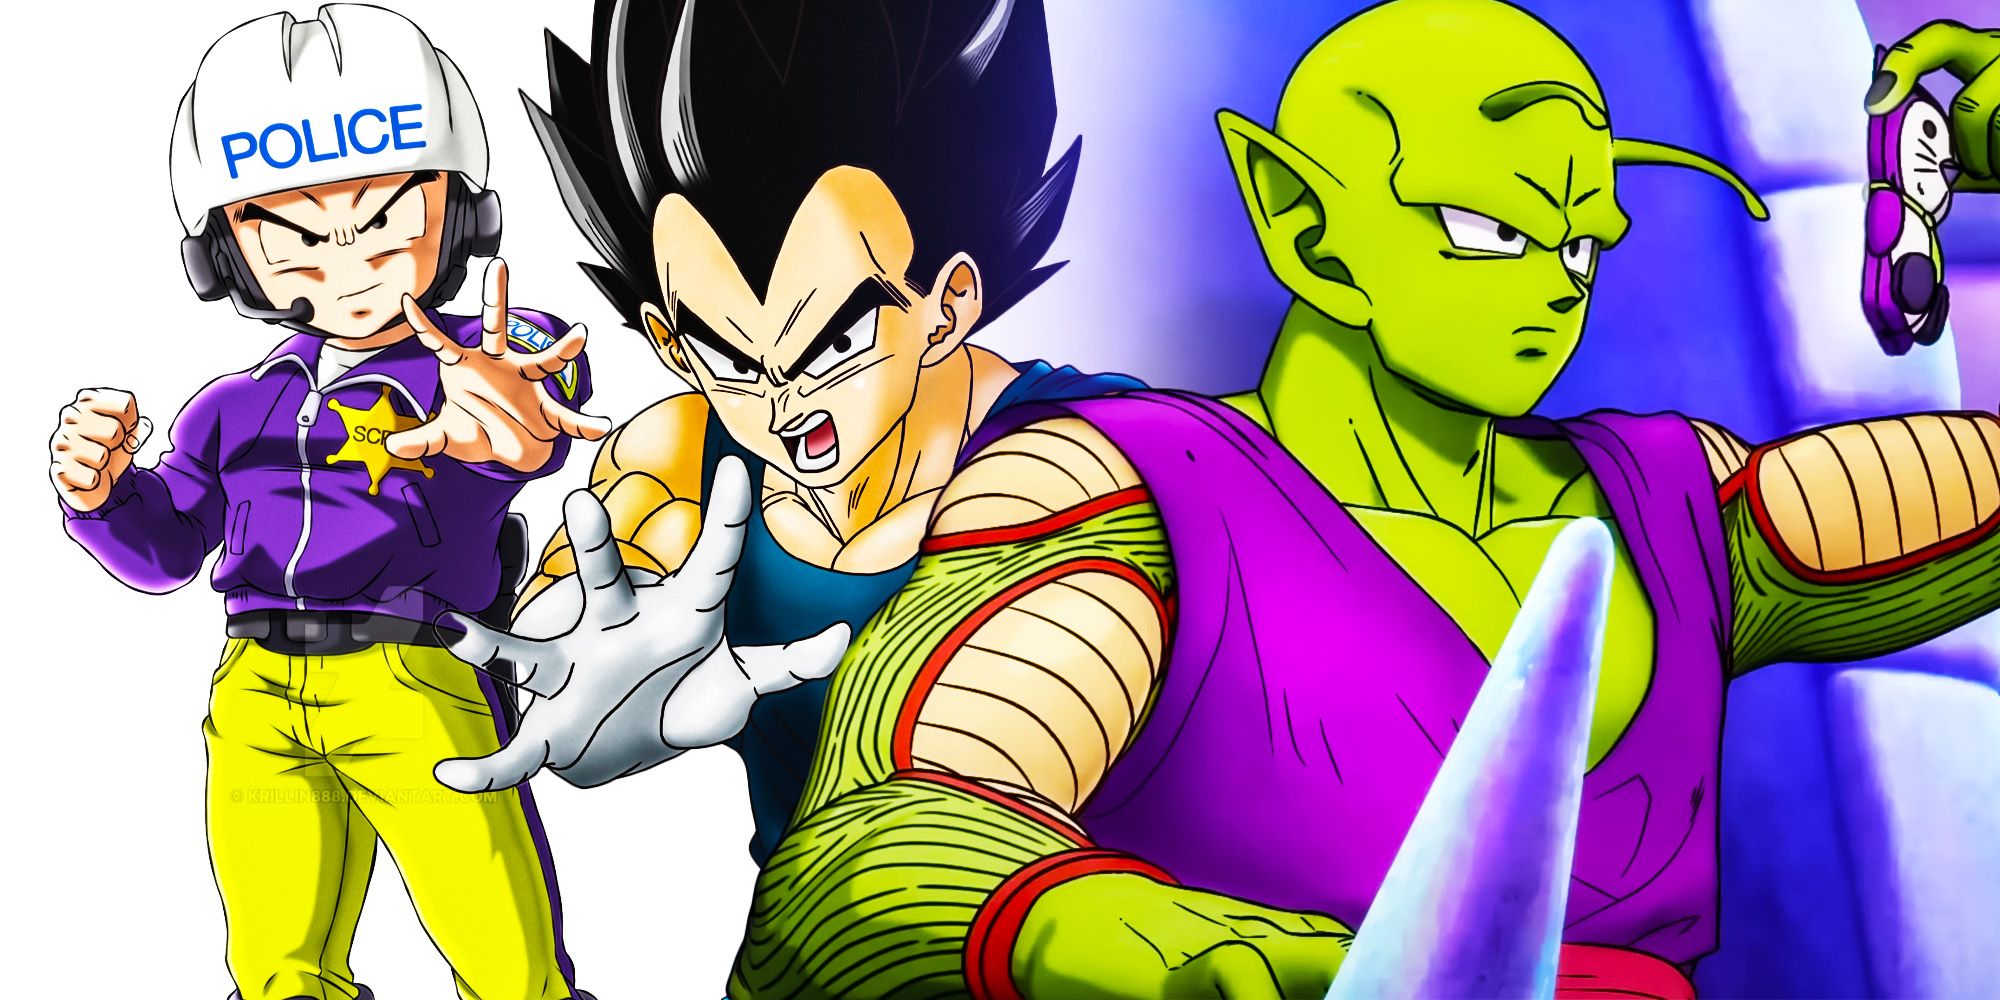 Dragon Ball Super: Super Hero' ranks on top after beating 'Beast